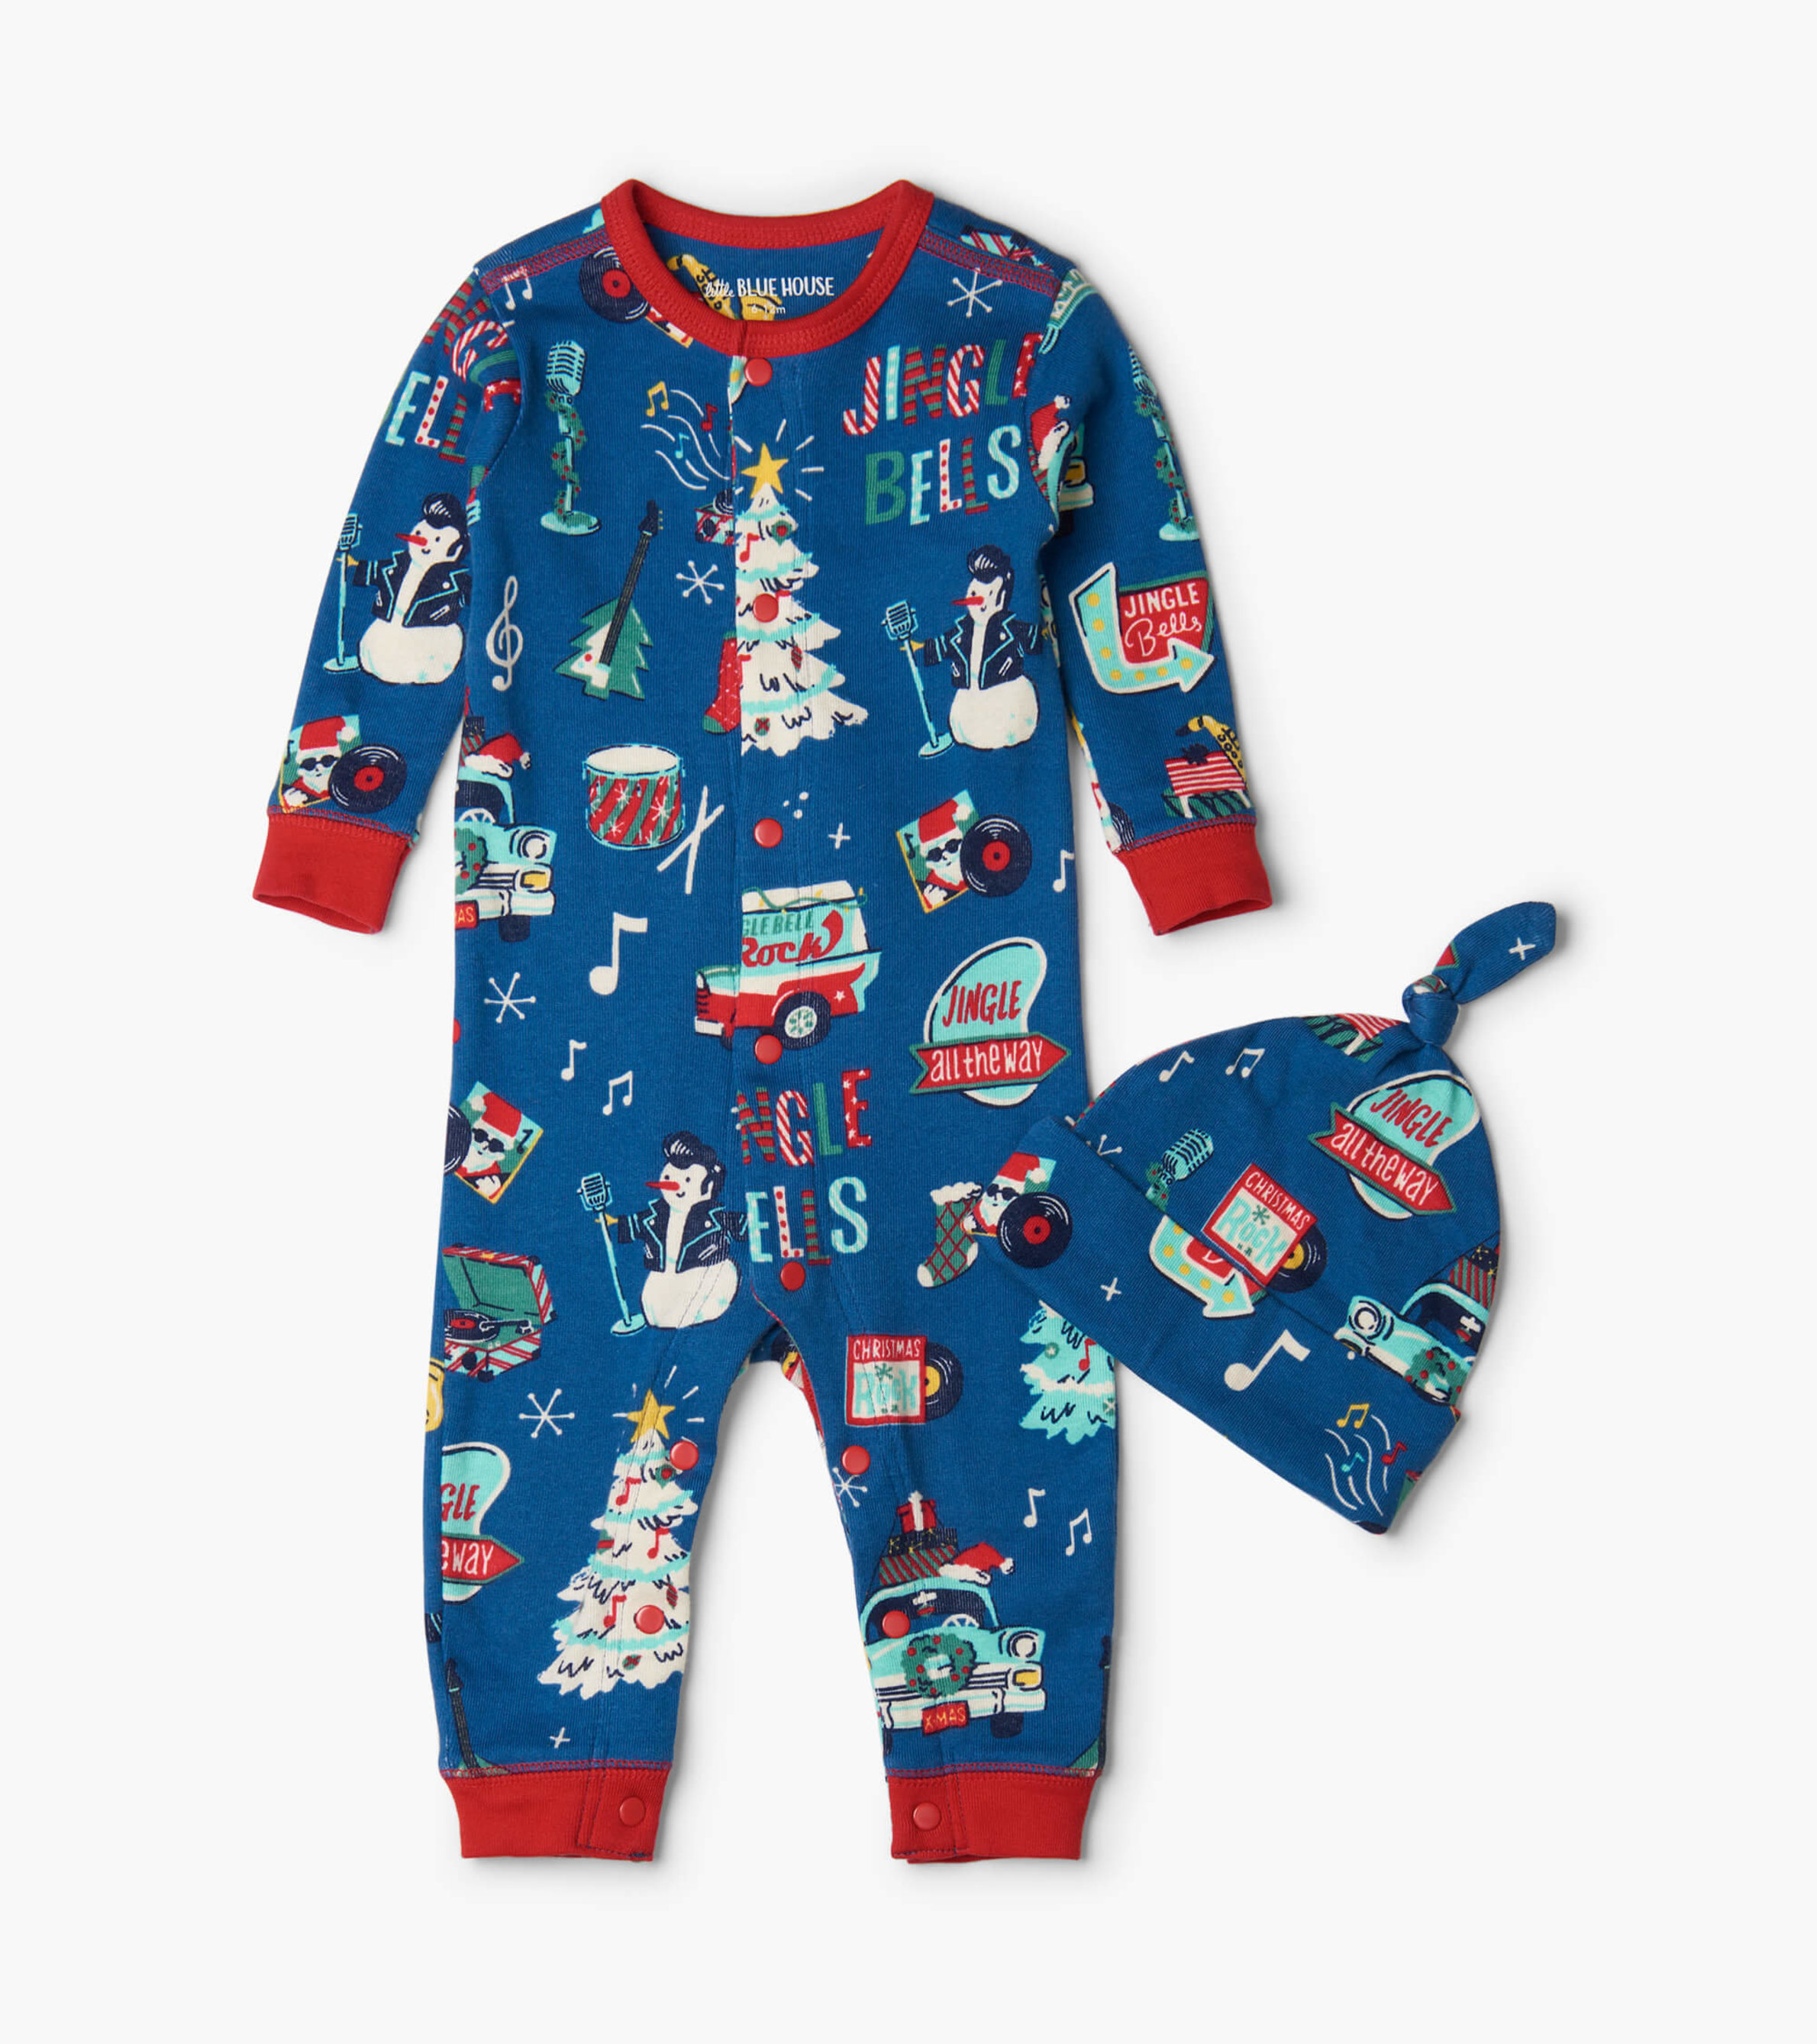 https://cdn.littlebluehouse.com/product_images/rockin-holidays-baby-coverall-hat/DR2BELL002_jpg/pdp_zoom.jpg?c=1629838371&locale=us_en